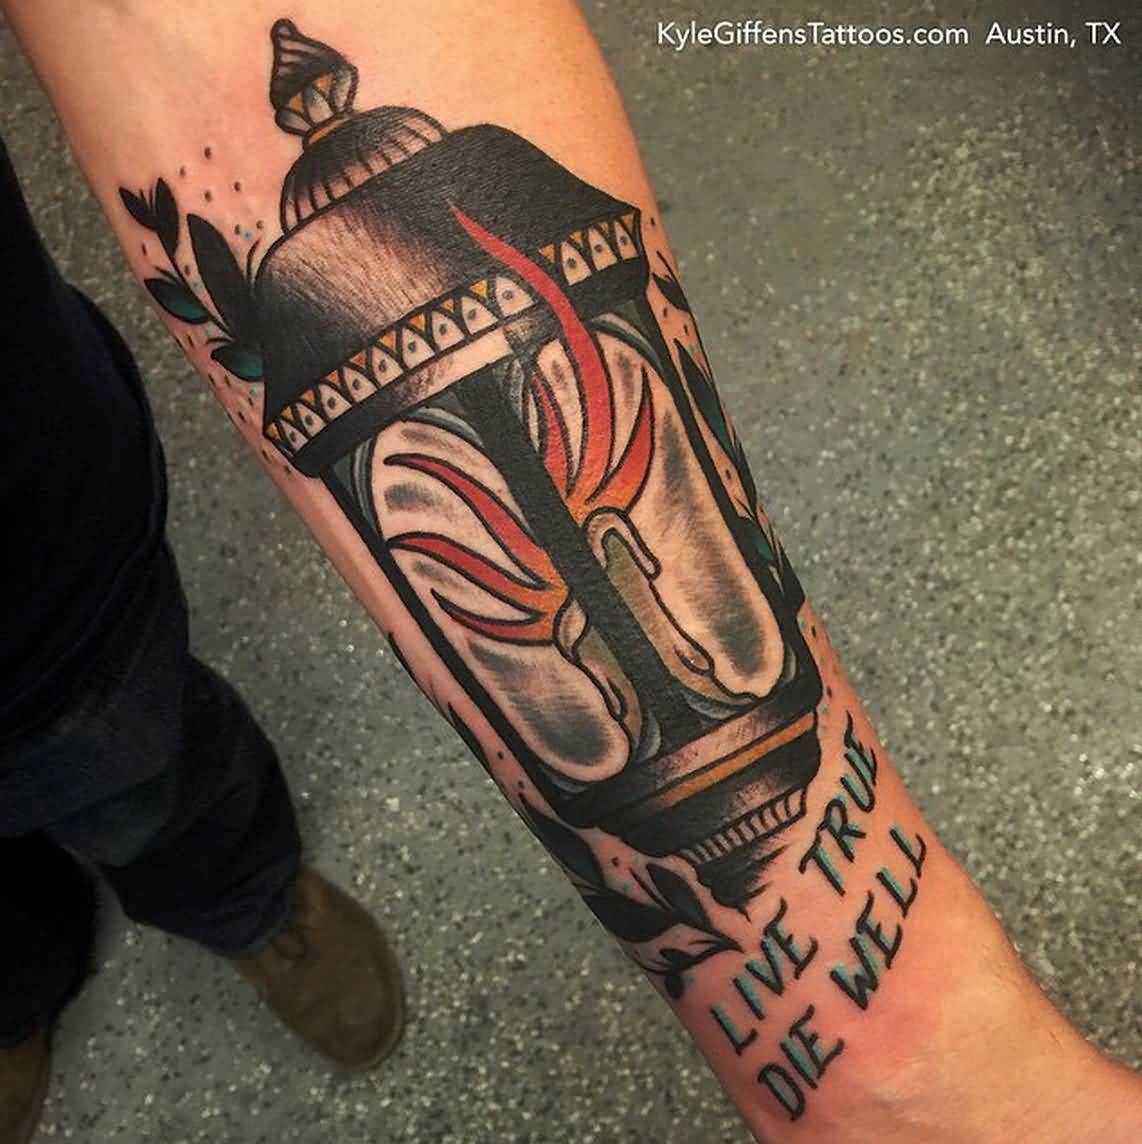 Traditional Lantern With Lettering Tattoo On Forearm By Kyle Giffen